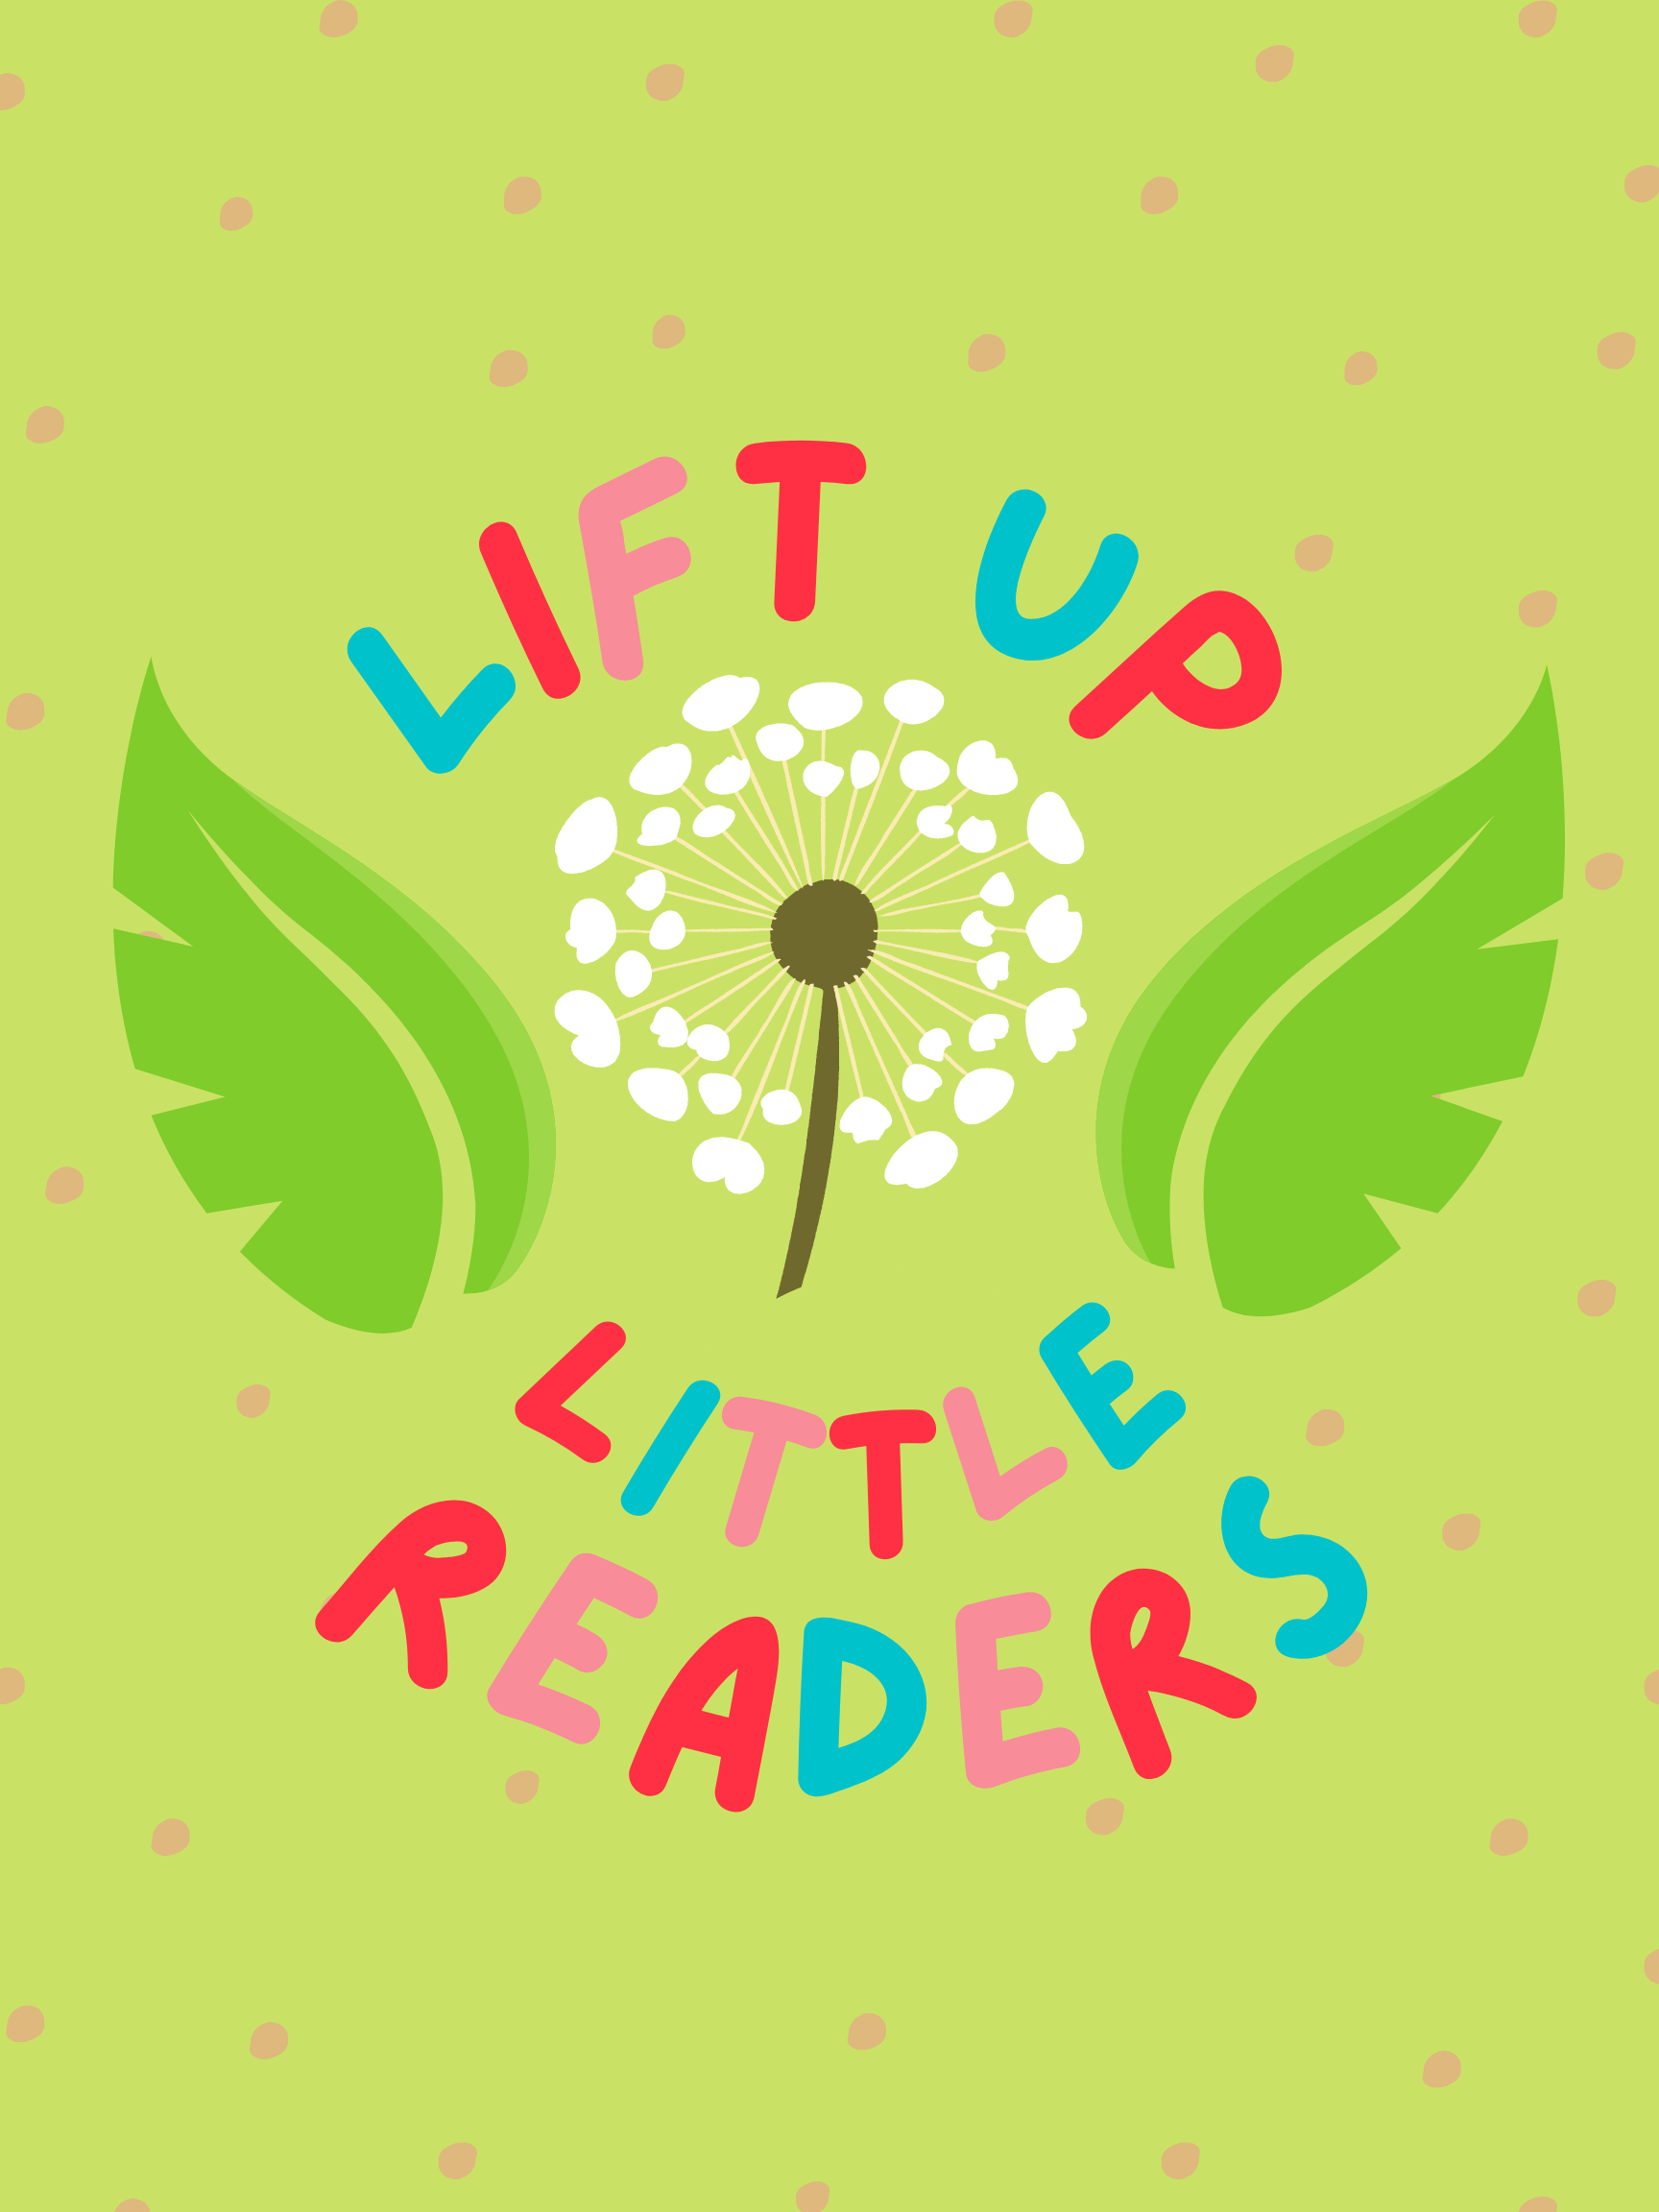 Lift Up Little Readers headline, with dandelion and leaves graphic.